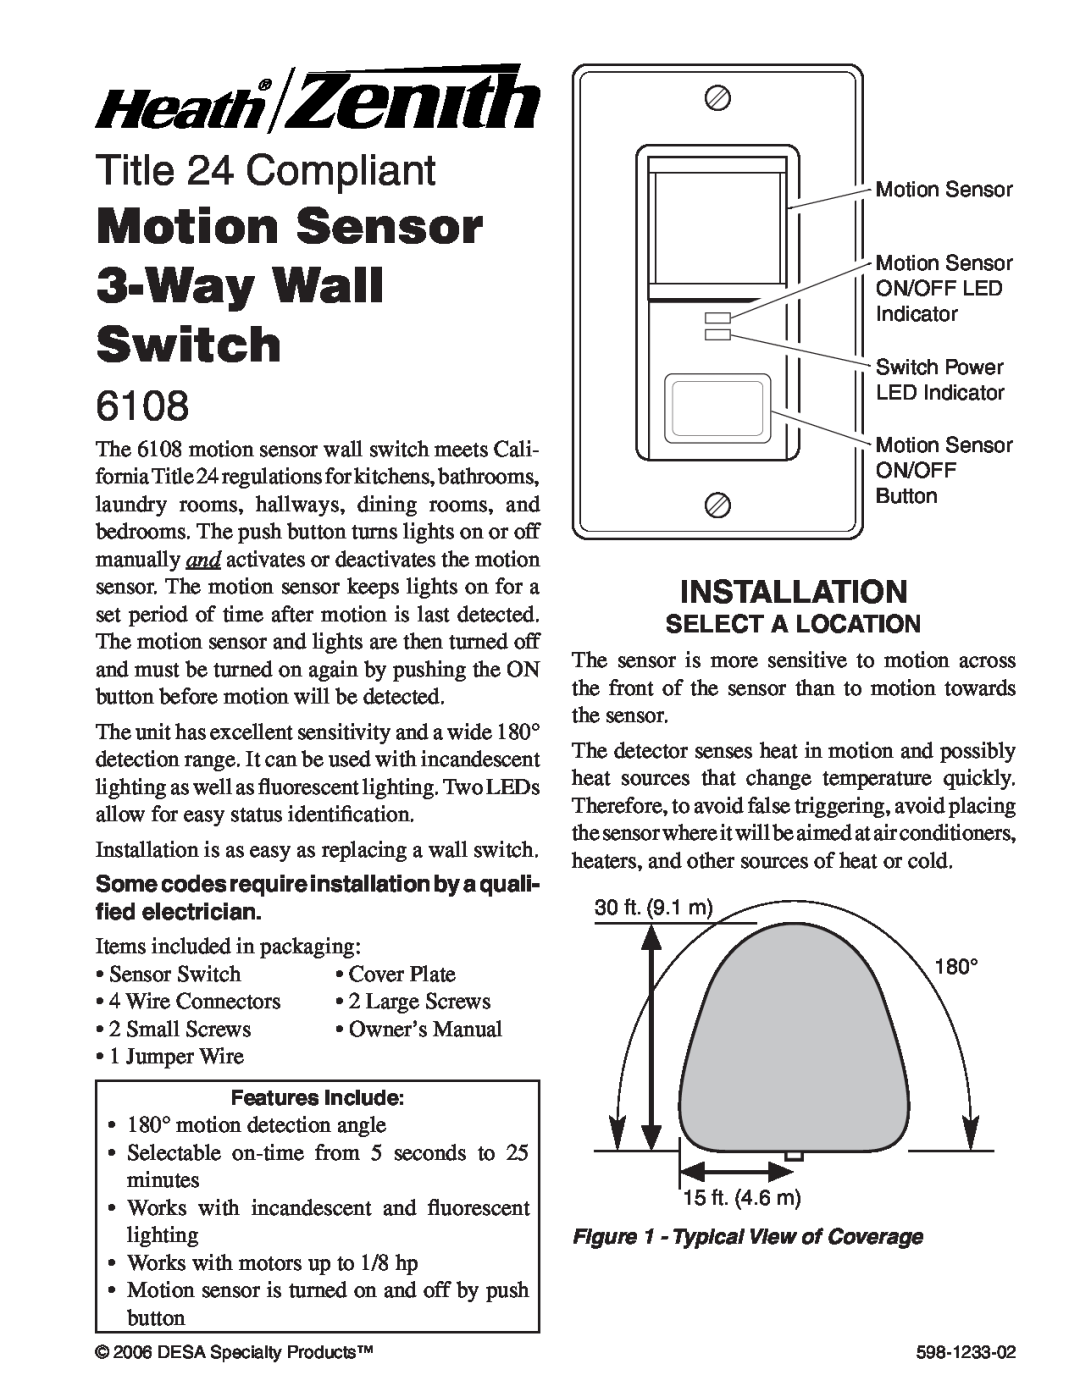 Heath Zenith 6108 owner manual Title 24 Compliant, Motion Sensor 3-WayWall Switch, Installation, Select A Location 